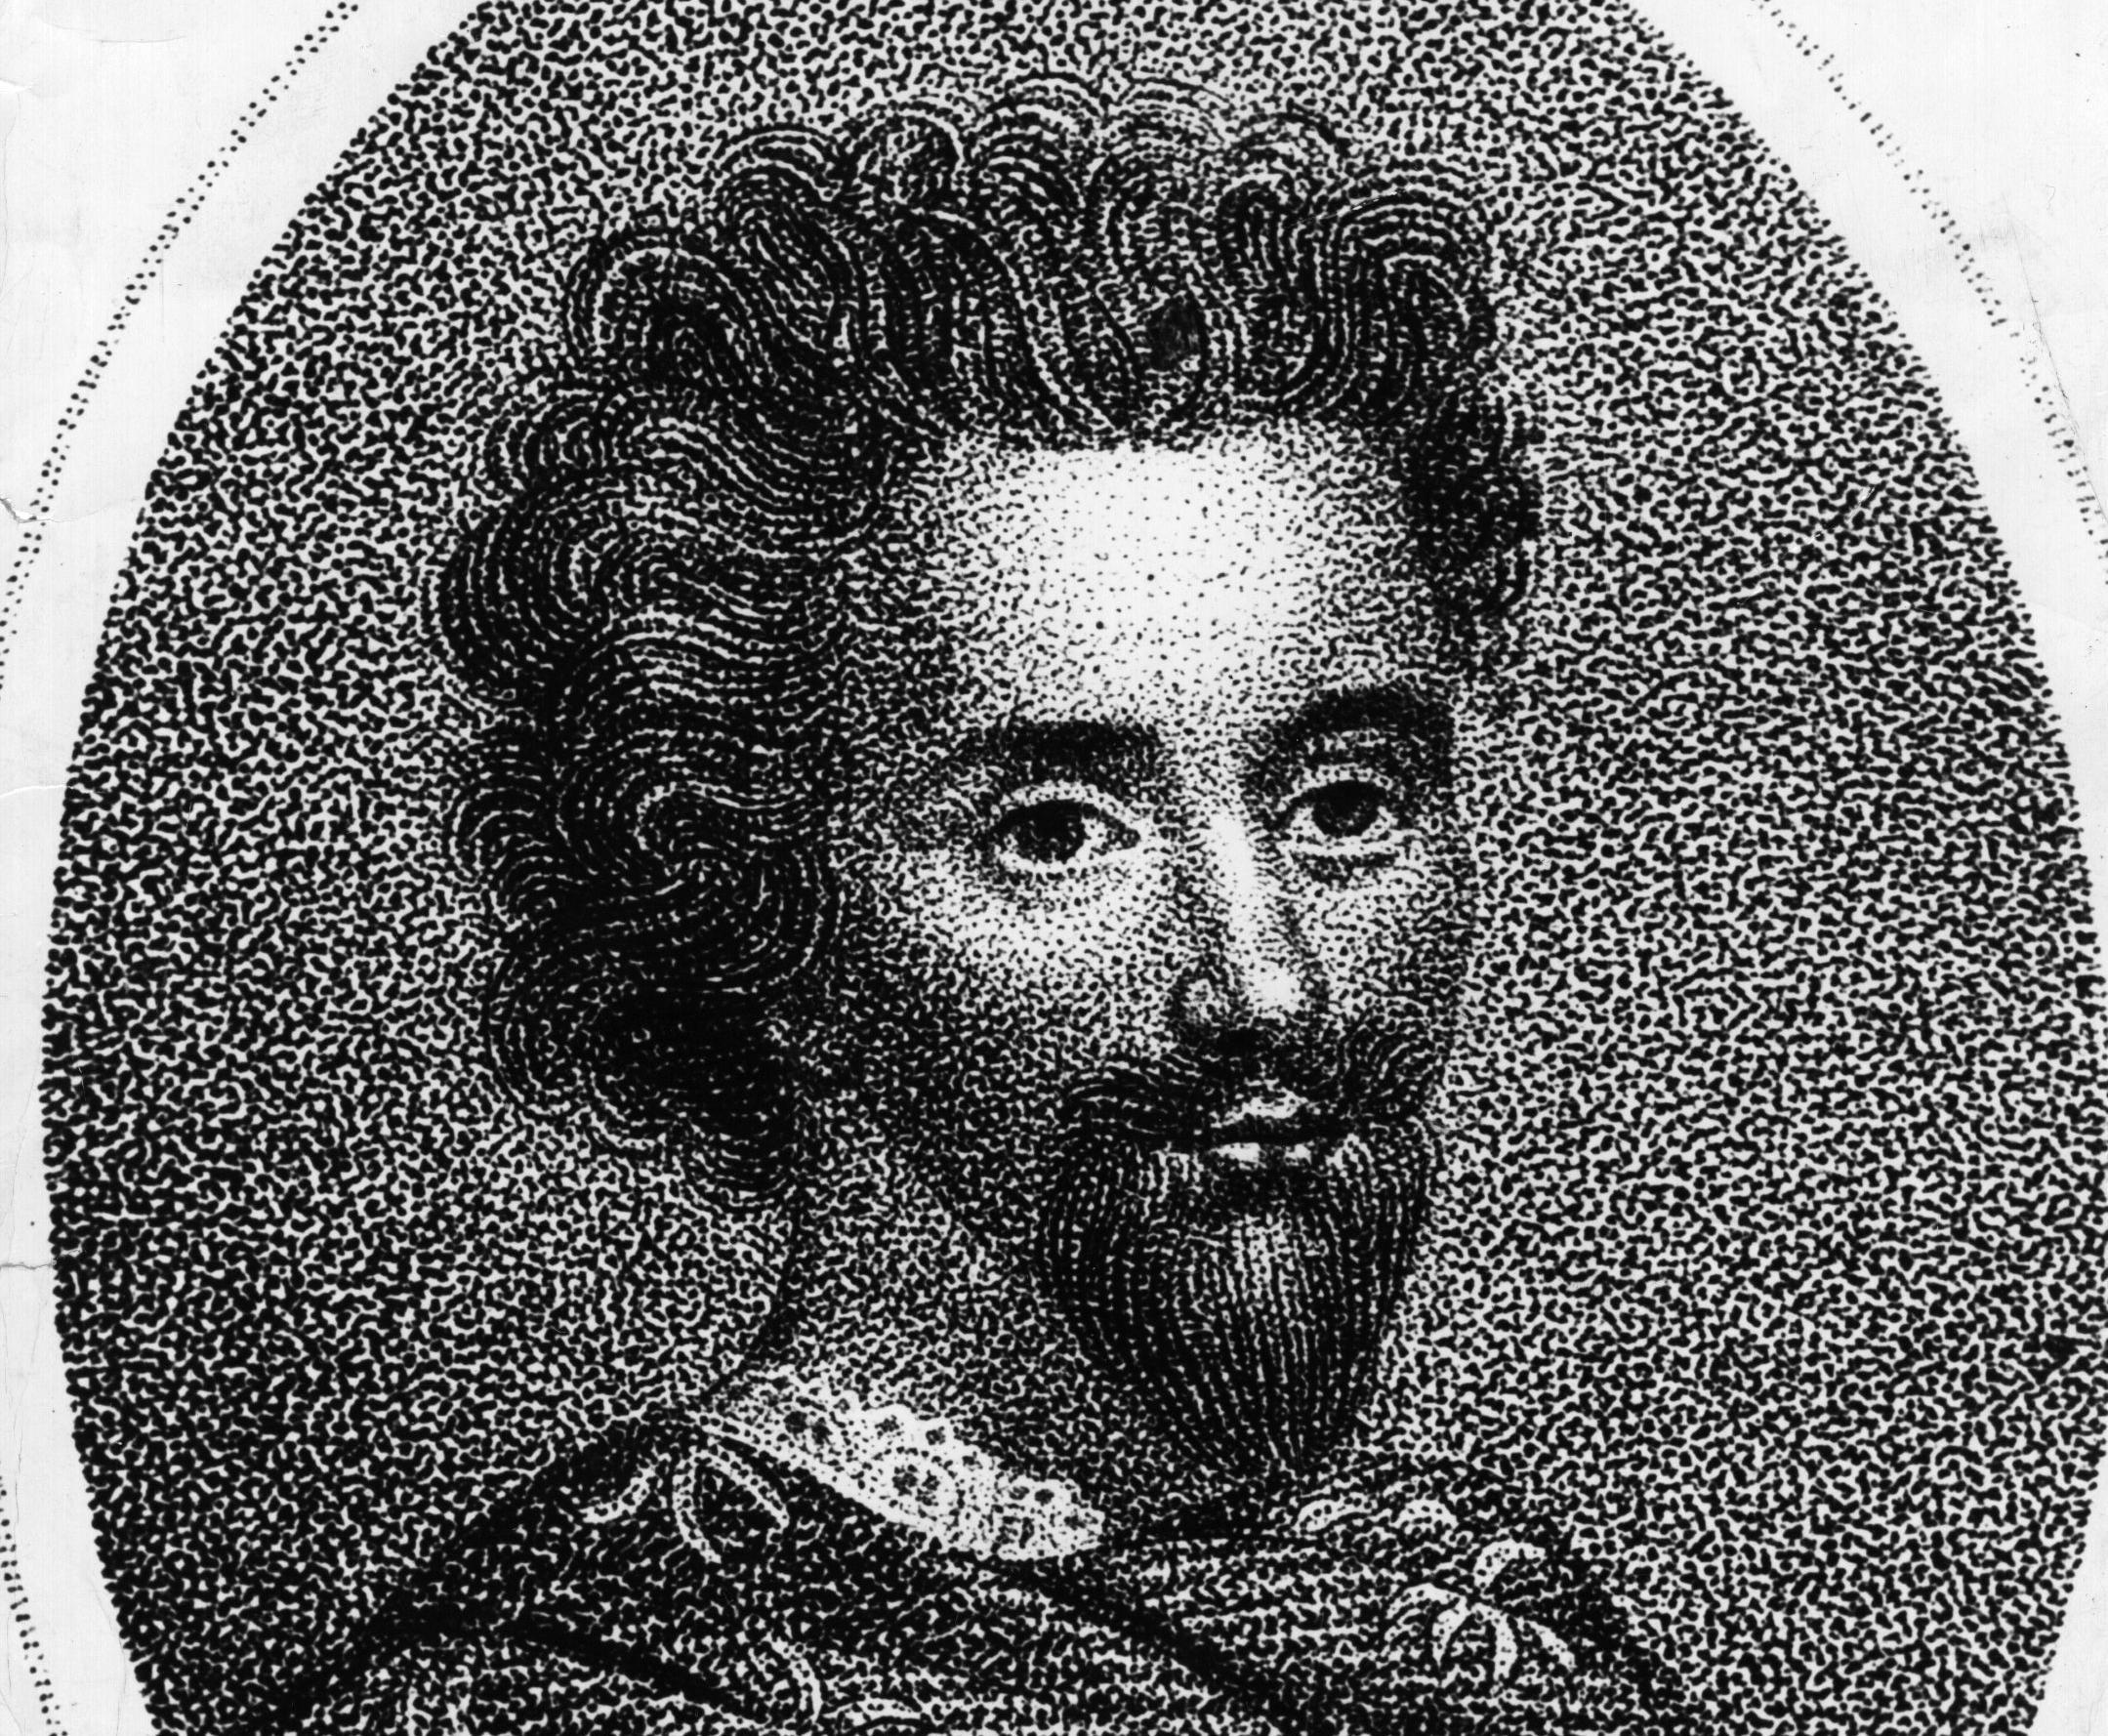 New research has suggested Marlowe contributed more to Shakespeare’s plays than previously thought